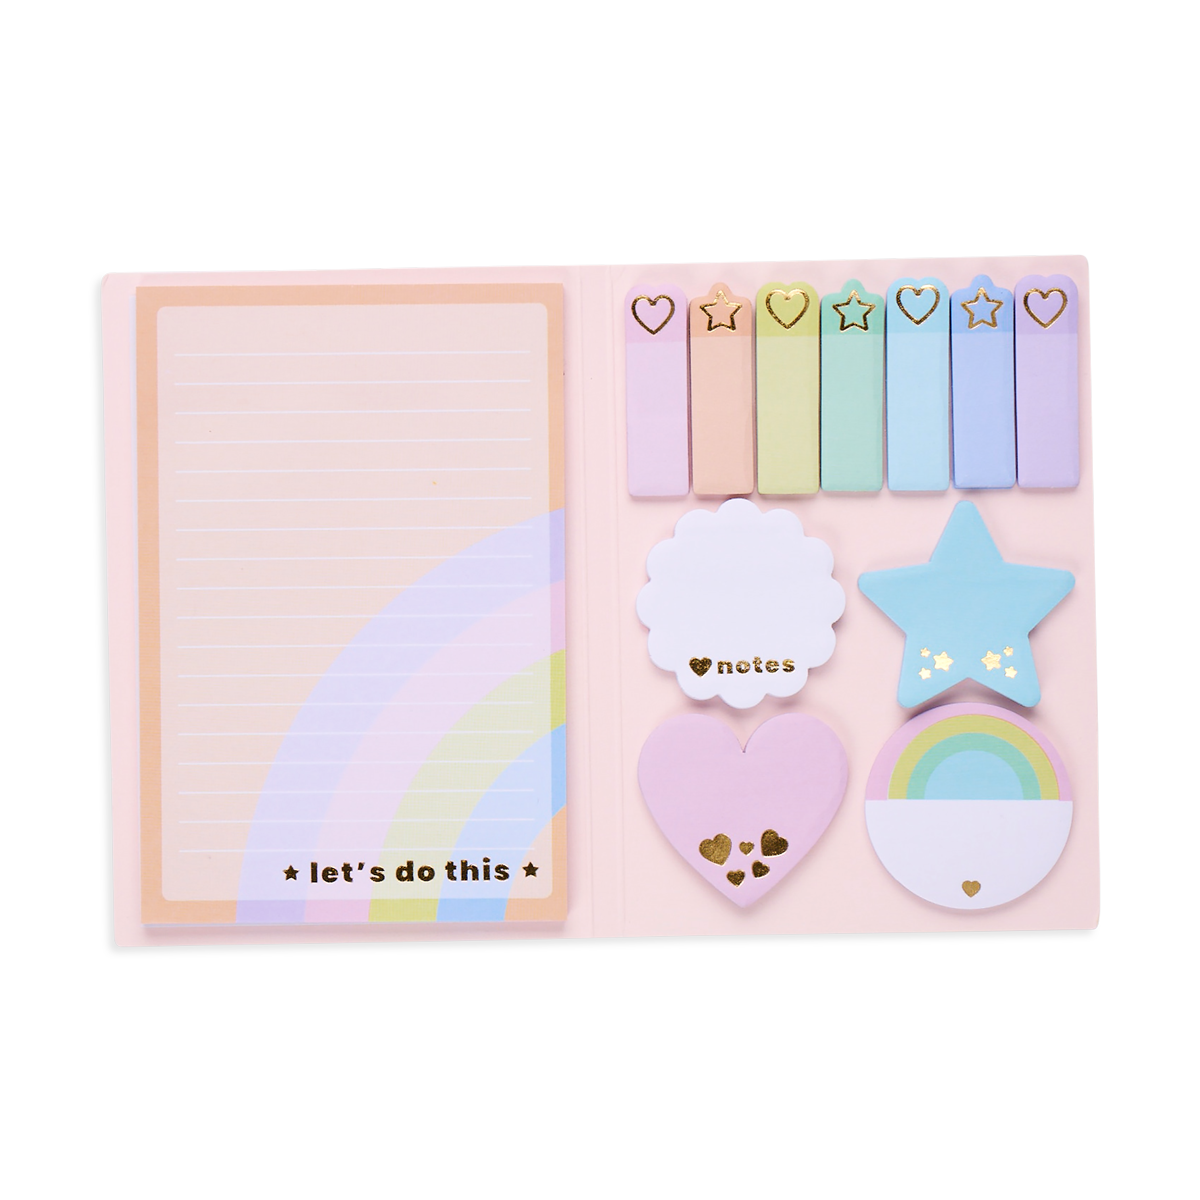 OOLY Side Notes Sticky Tab Note Pad - Pastel Rainbows view of all styles